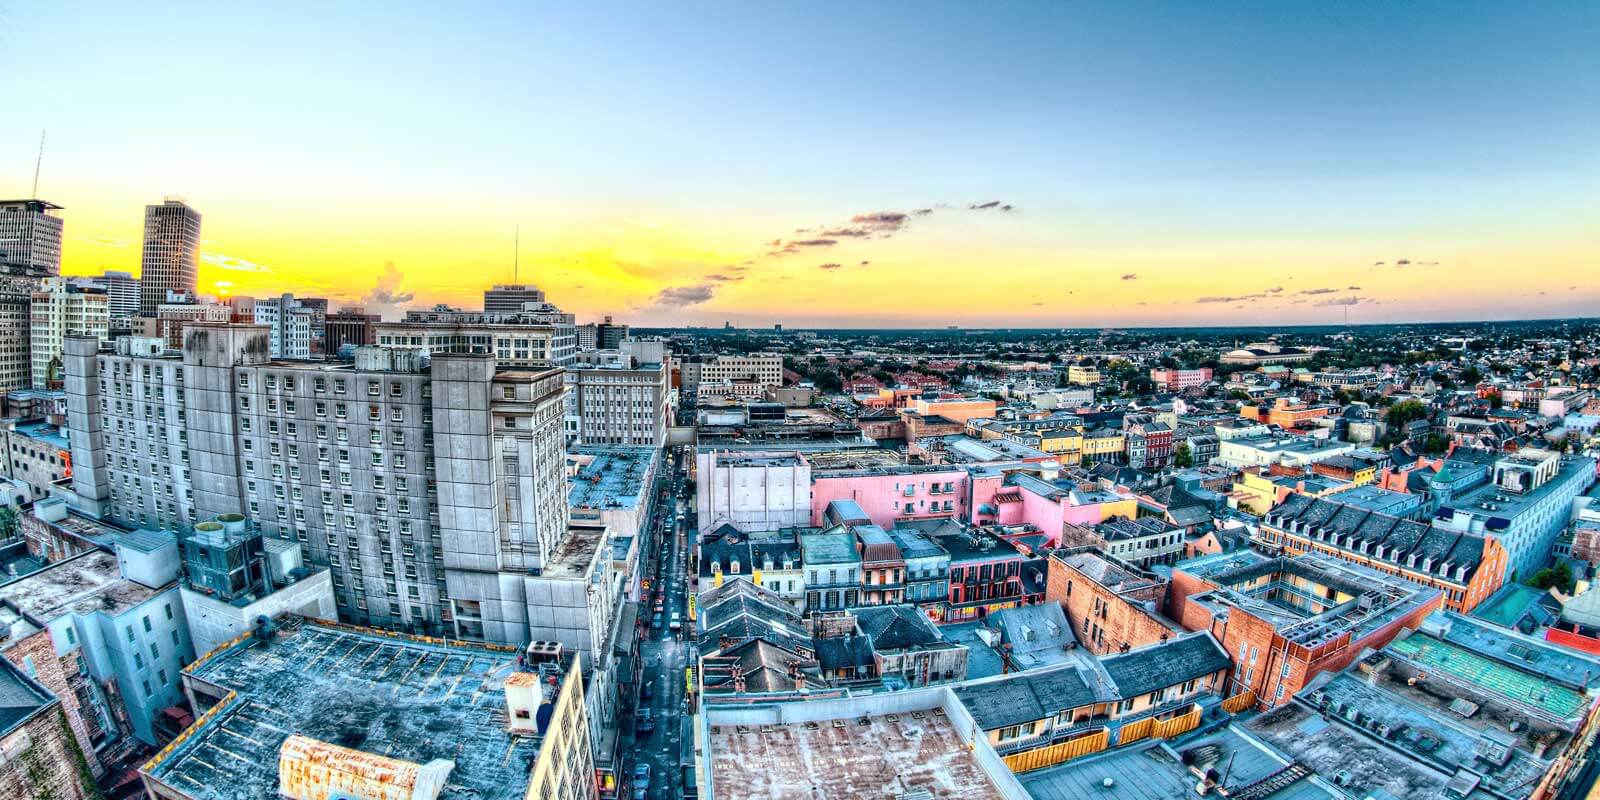 Rooftop views of New Orleans from Hotel Monteleone